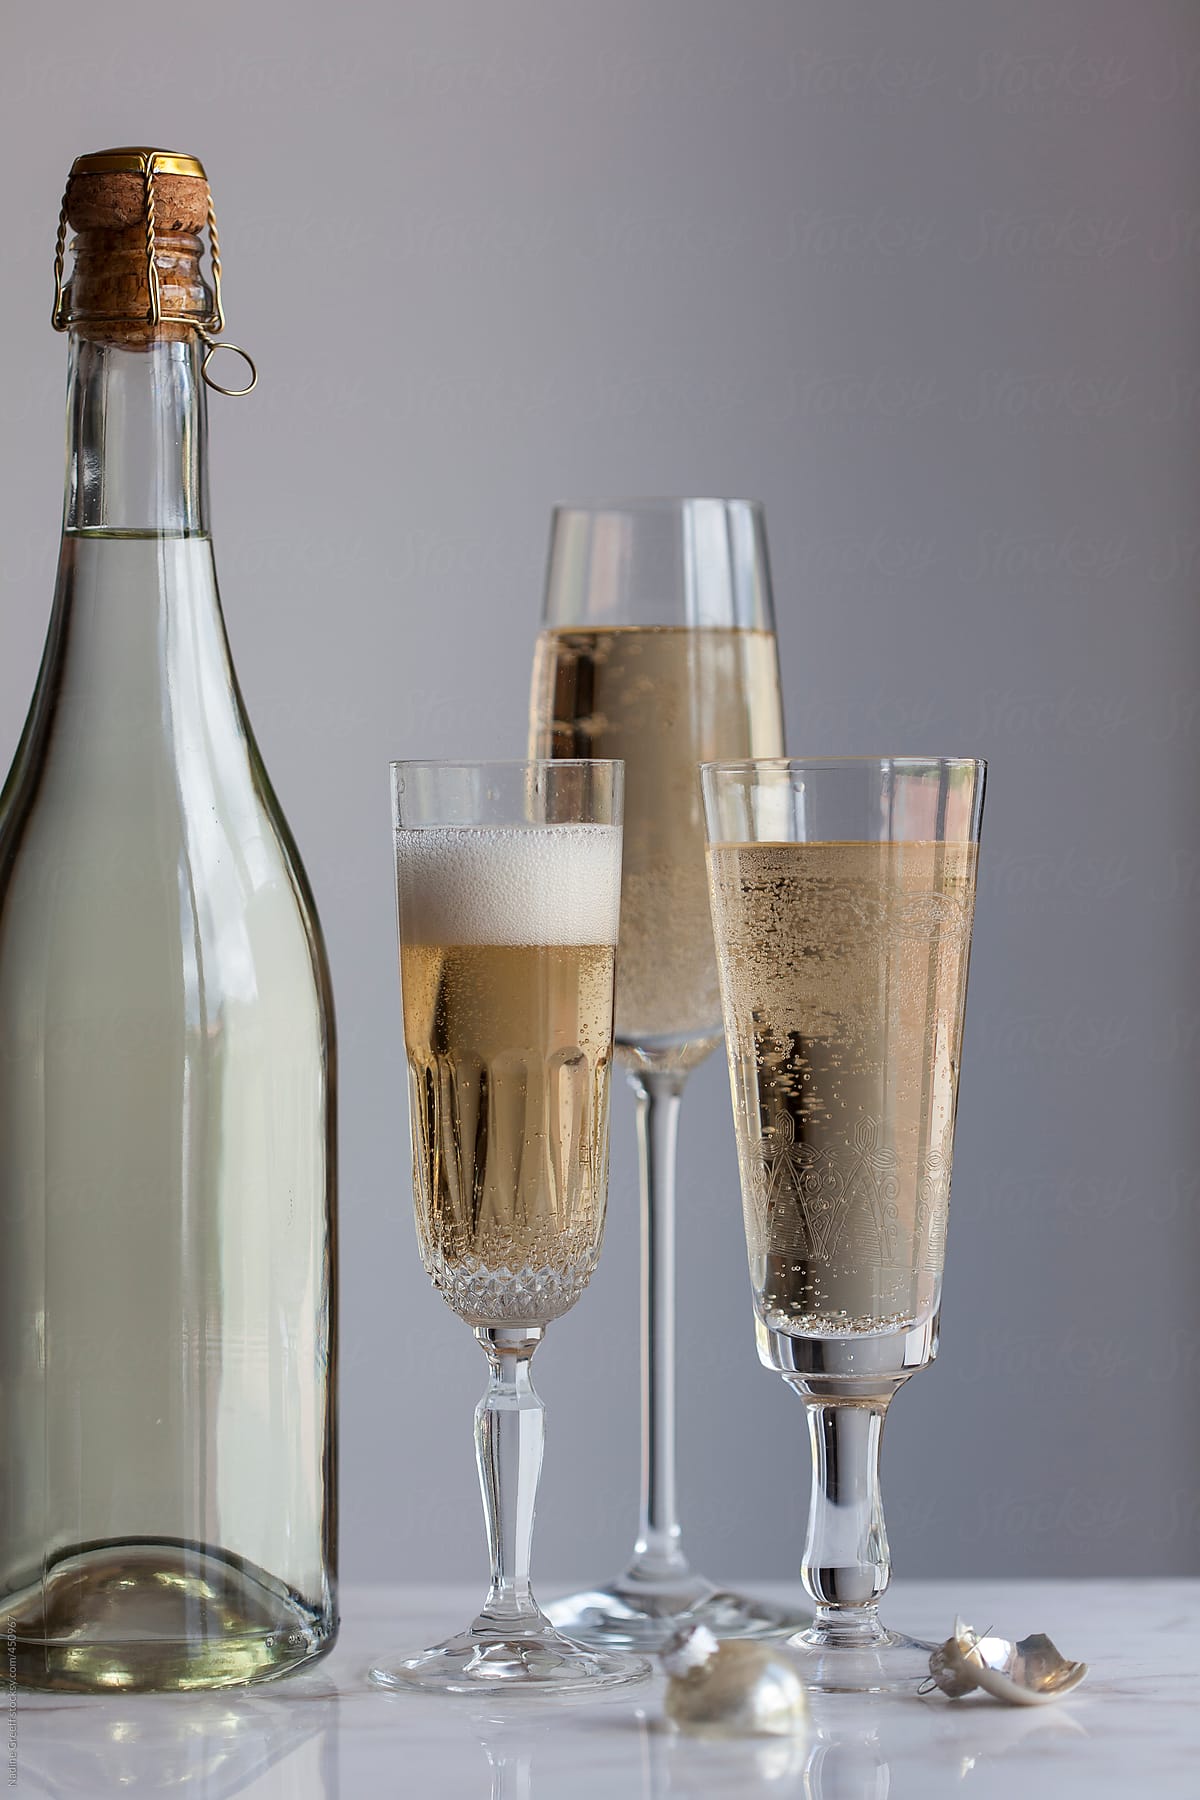 Champagne Bottle with glasses of champagne